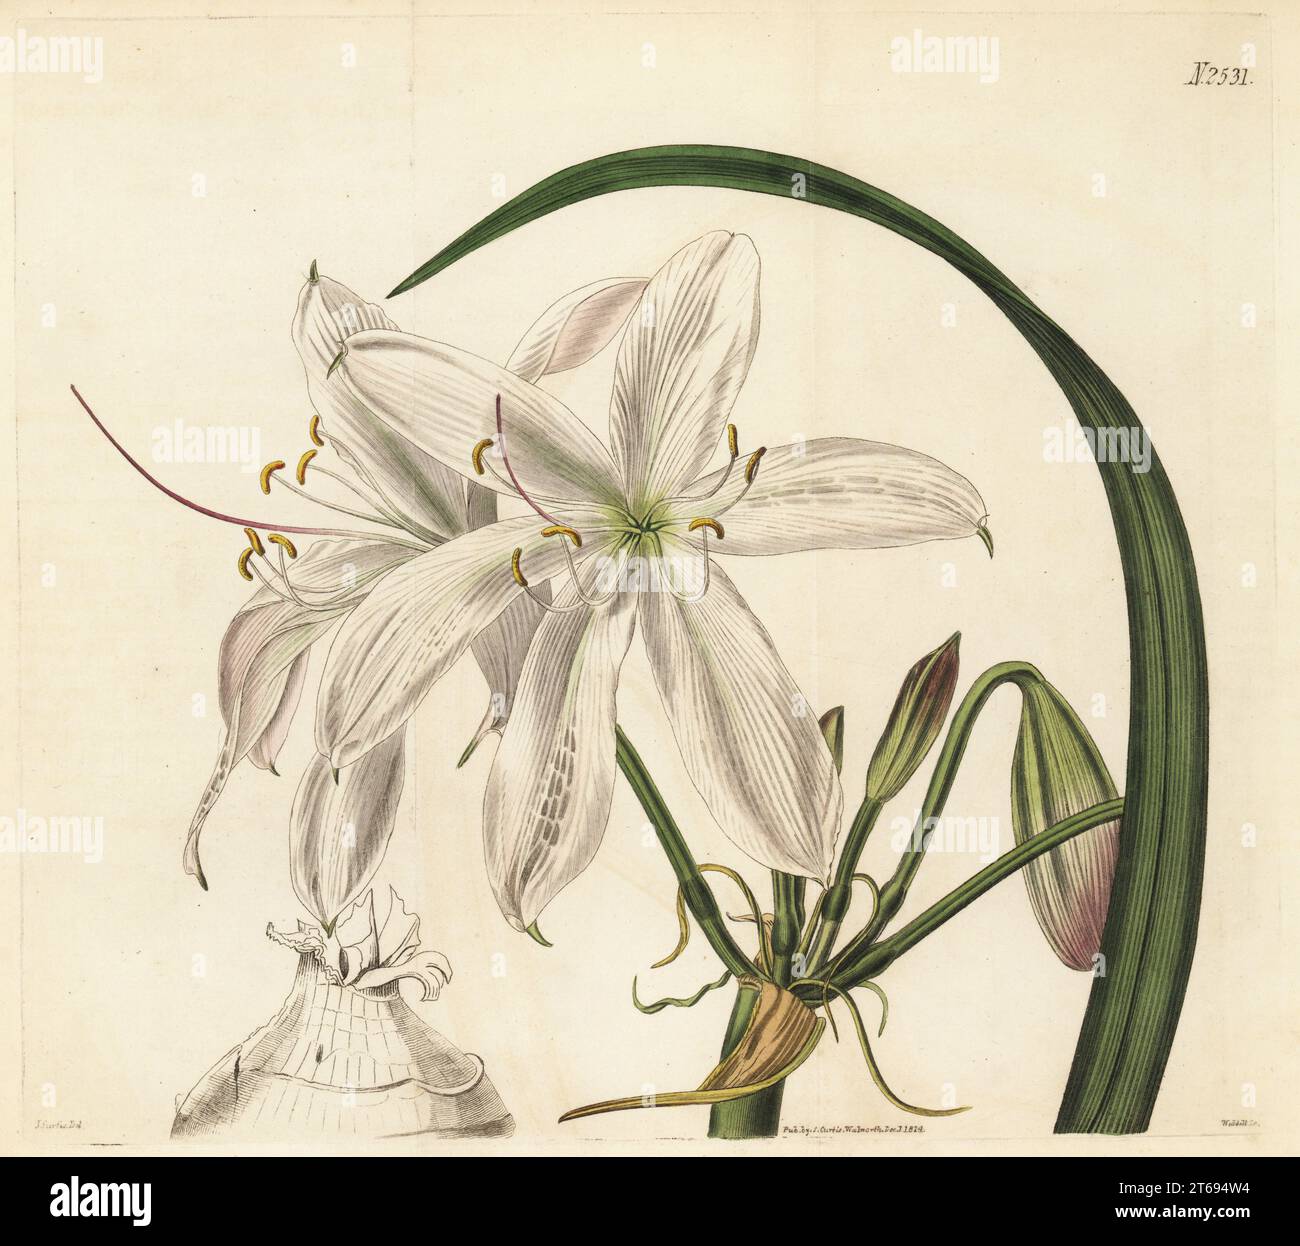 Blush-coloured swamp lily or sand crinum, Crinum arenarium. Native of Australia, drawn at Joseph Knight's Exotic Nursery, King's Road, Chelsea. Handcoloured copperplate engraving by Weddell after a botanical illustration by John Curtis from William Curtis's Botanical Magazine, Samuel Curtis, London, 1824. Stock Photo